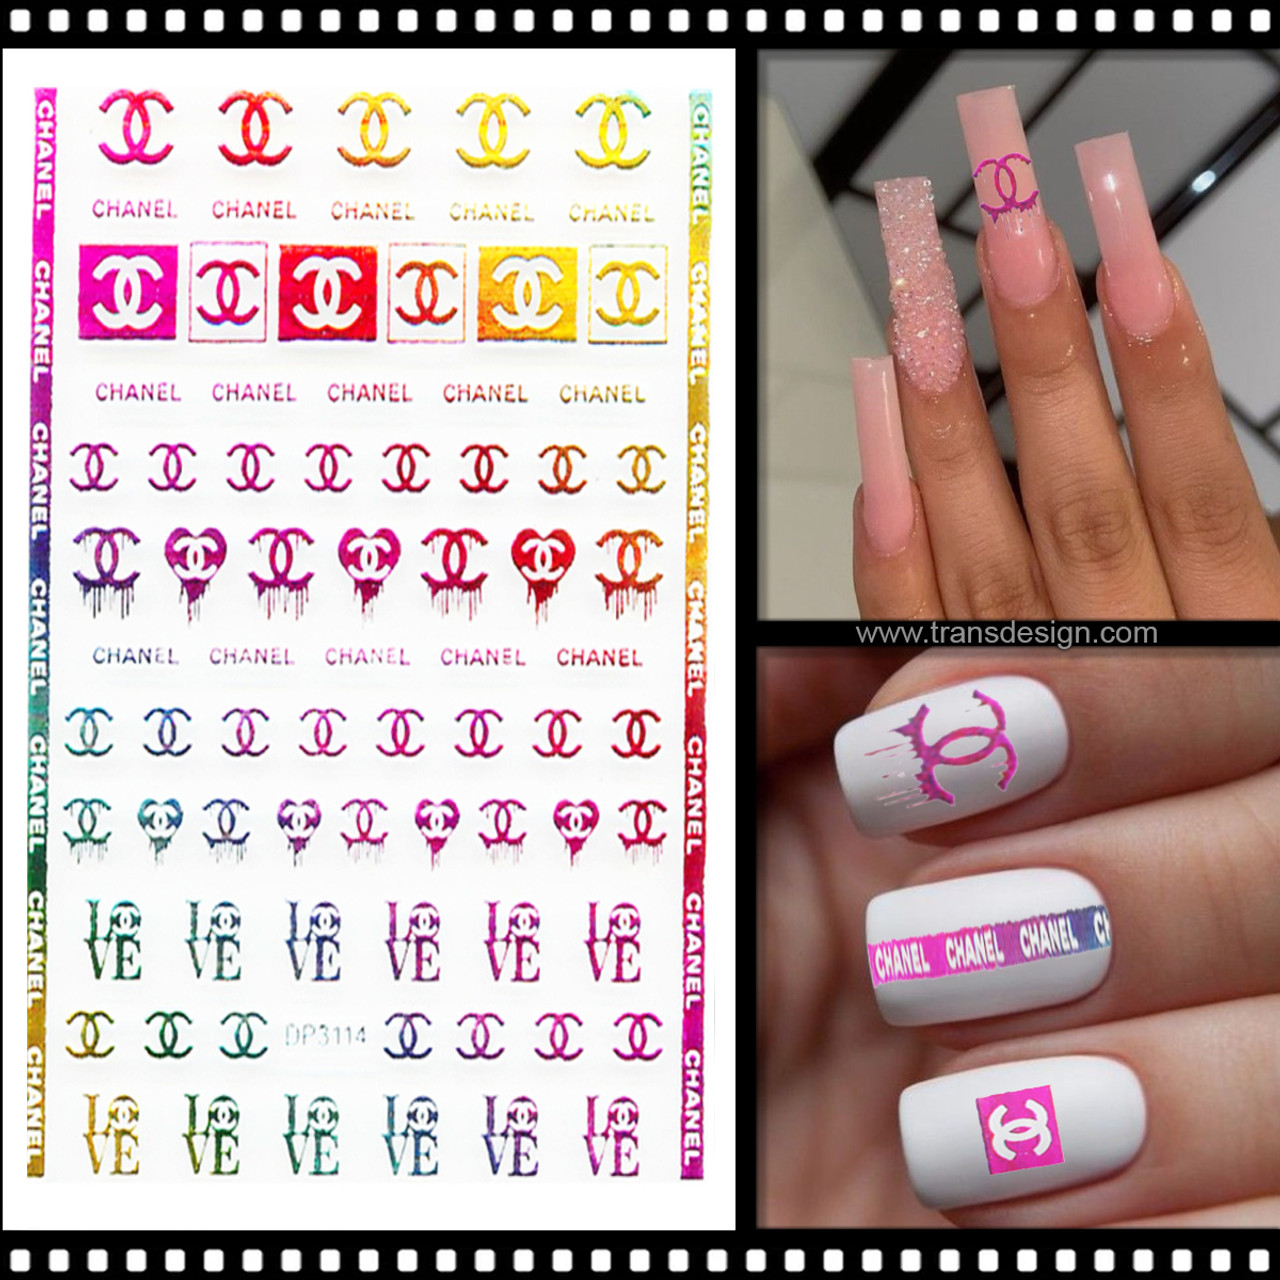 PINK CHANEL NAIL DECALS